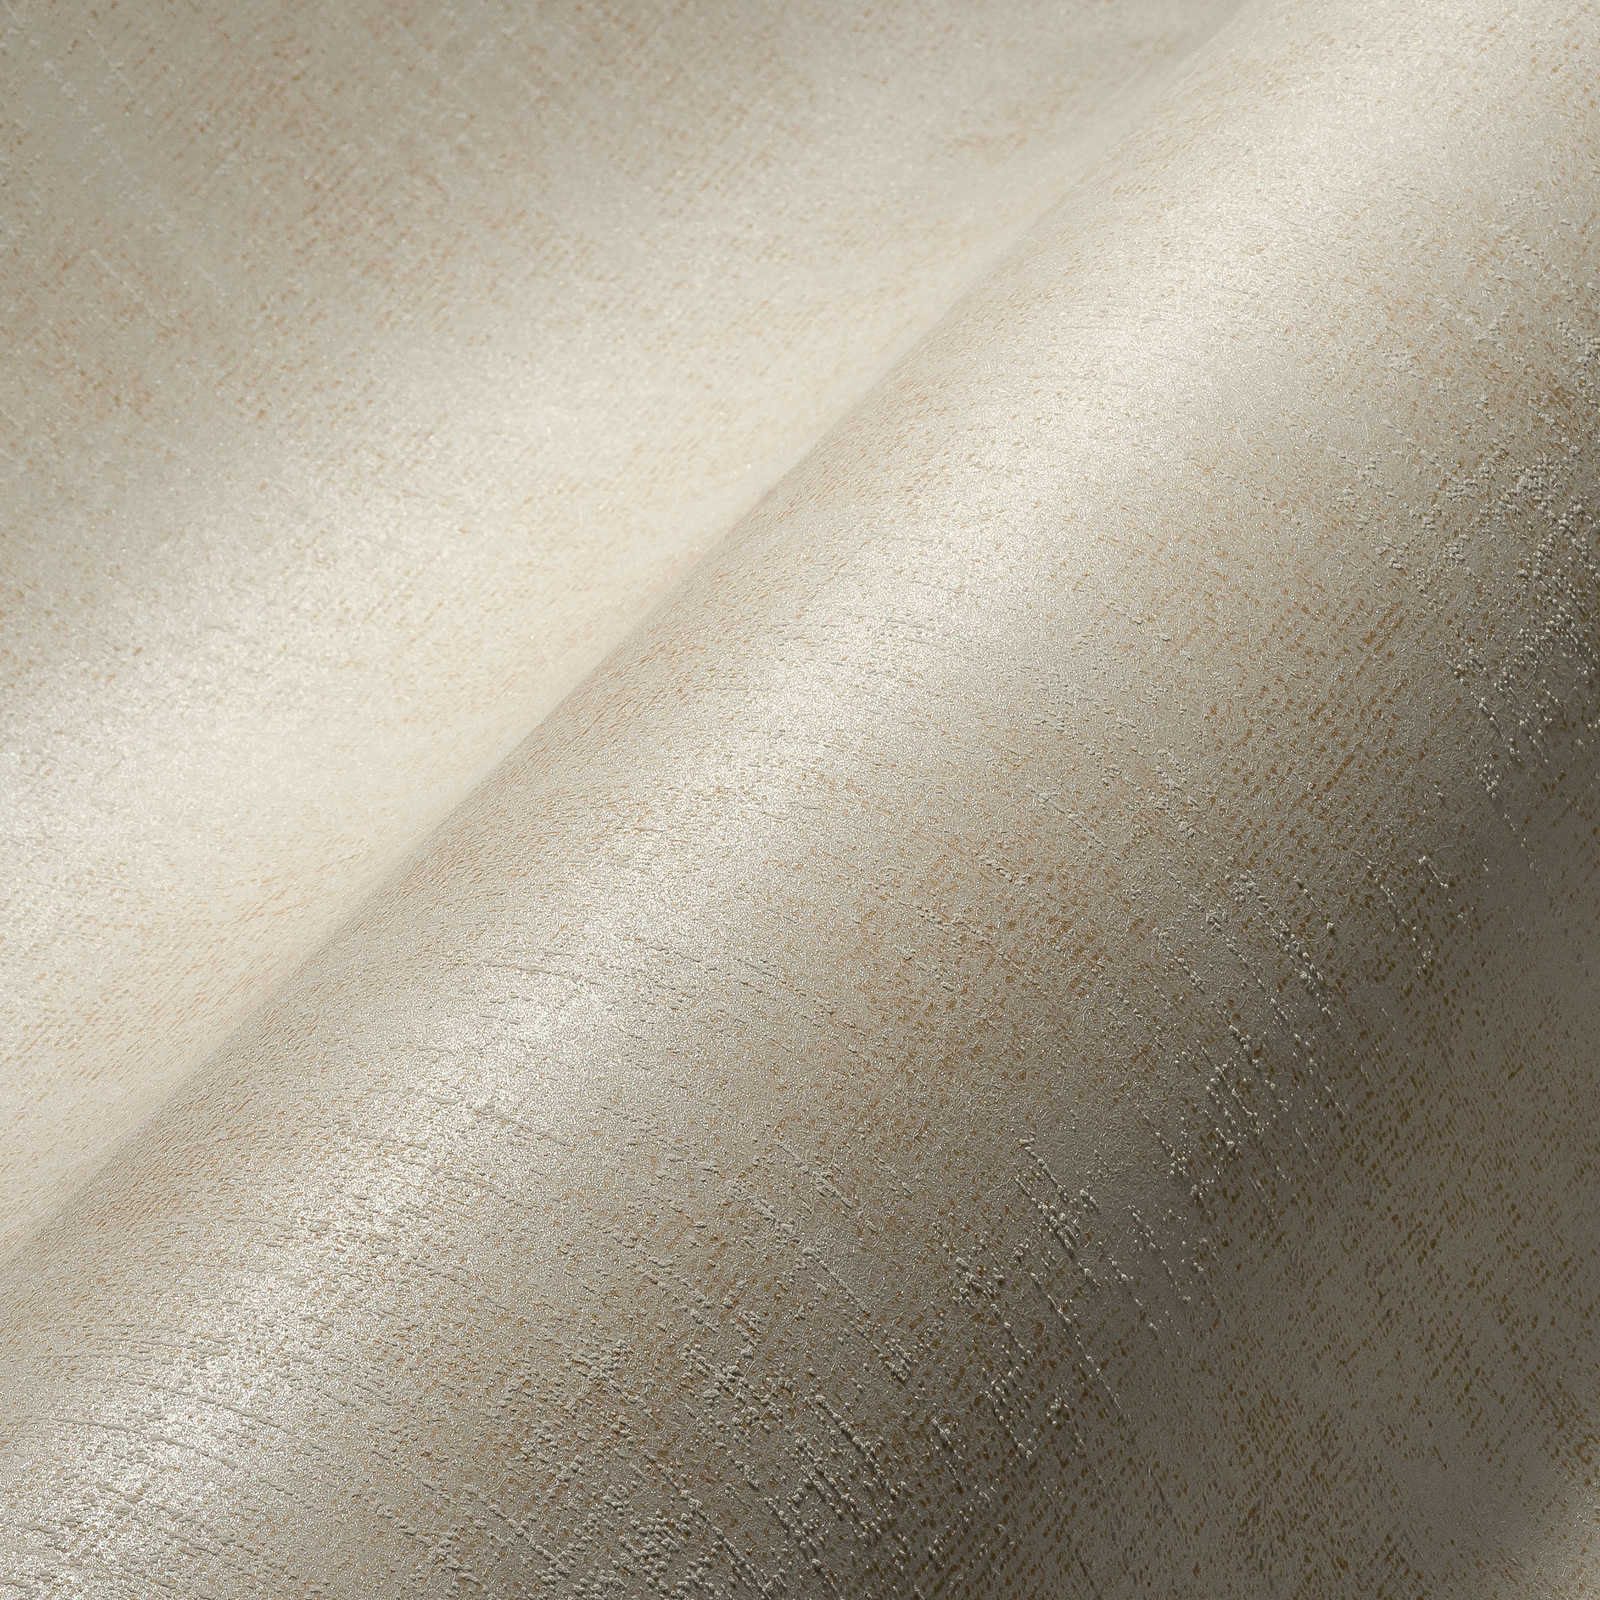             Wallpaper cream white with textile optics & shimmer effect - beige
        